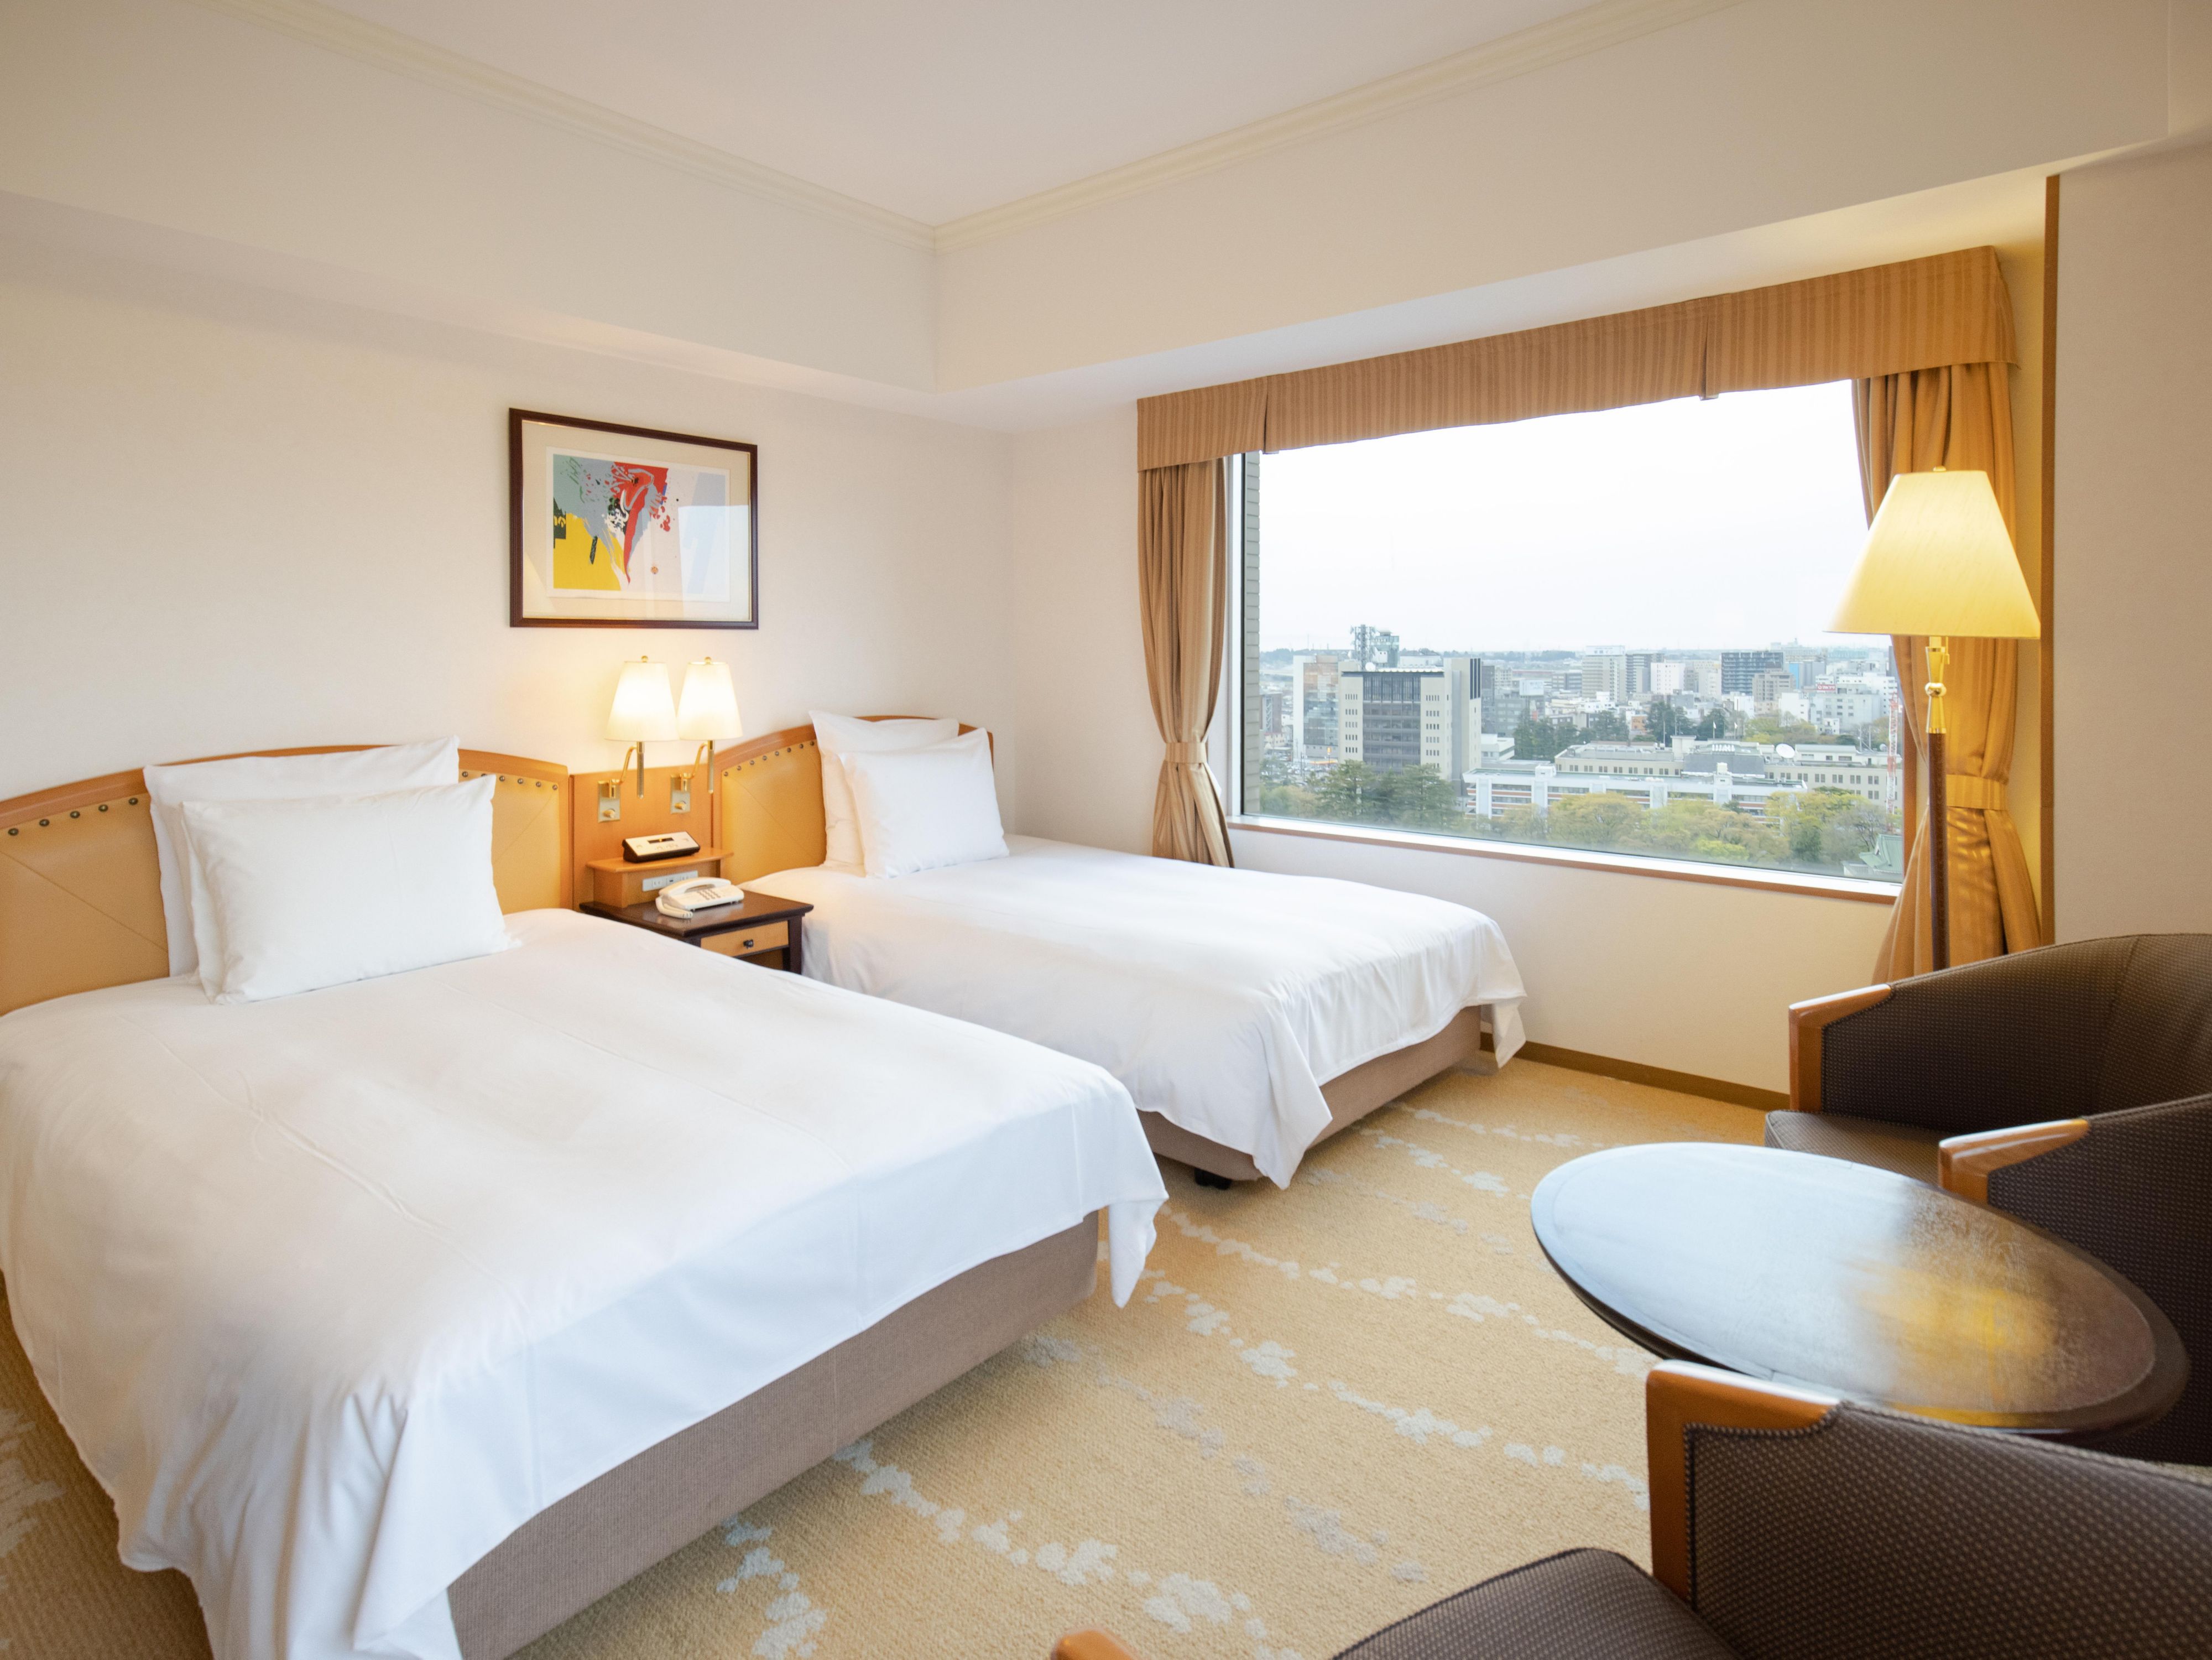 With 252 spacious guest rooms, travelers can relax in a cozy, modern and relaxing atmosphere. Our Standard rooms are located on levels 6-15, while Premier rooms are located on levels 16-18, offering incredible panoramic views of Tateyama Mountain Range on clear days.